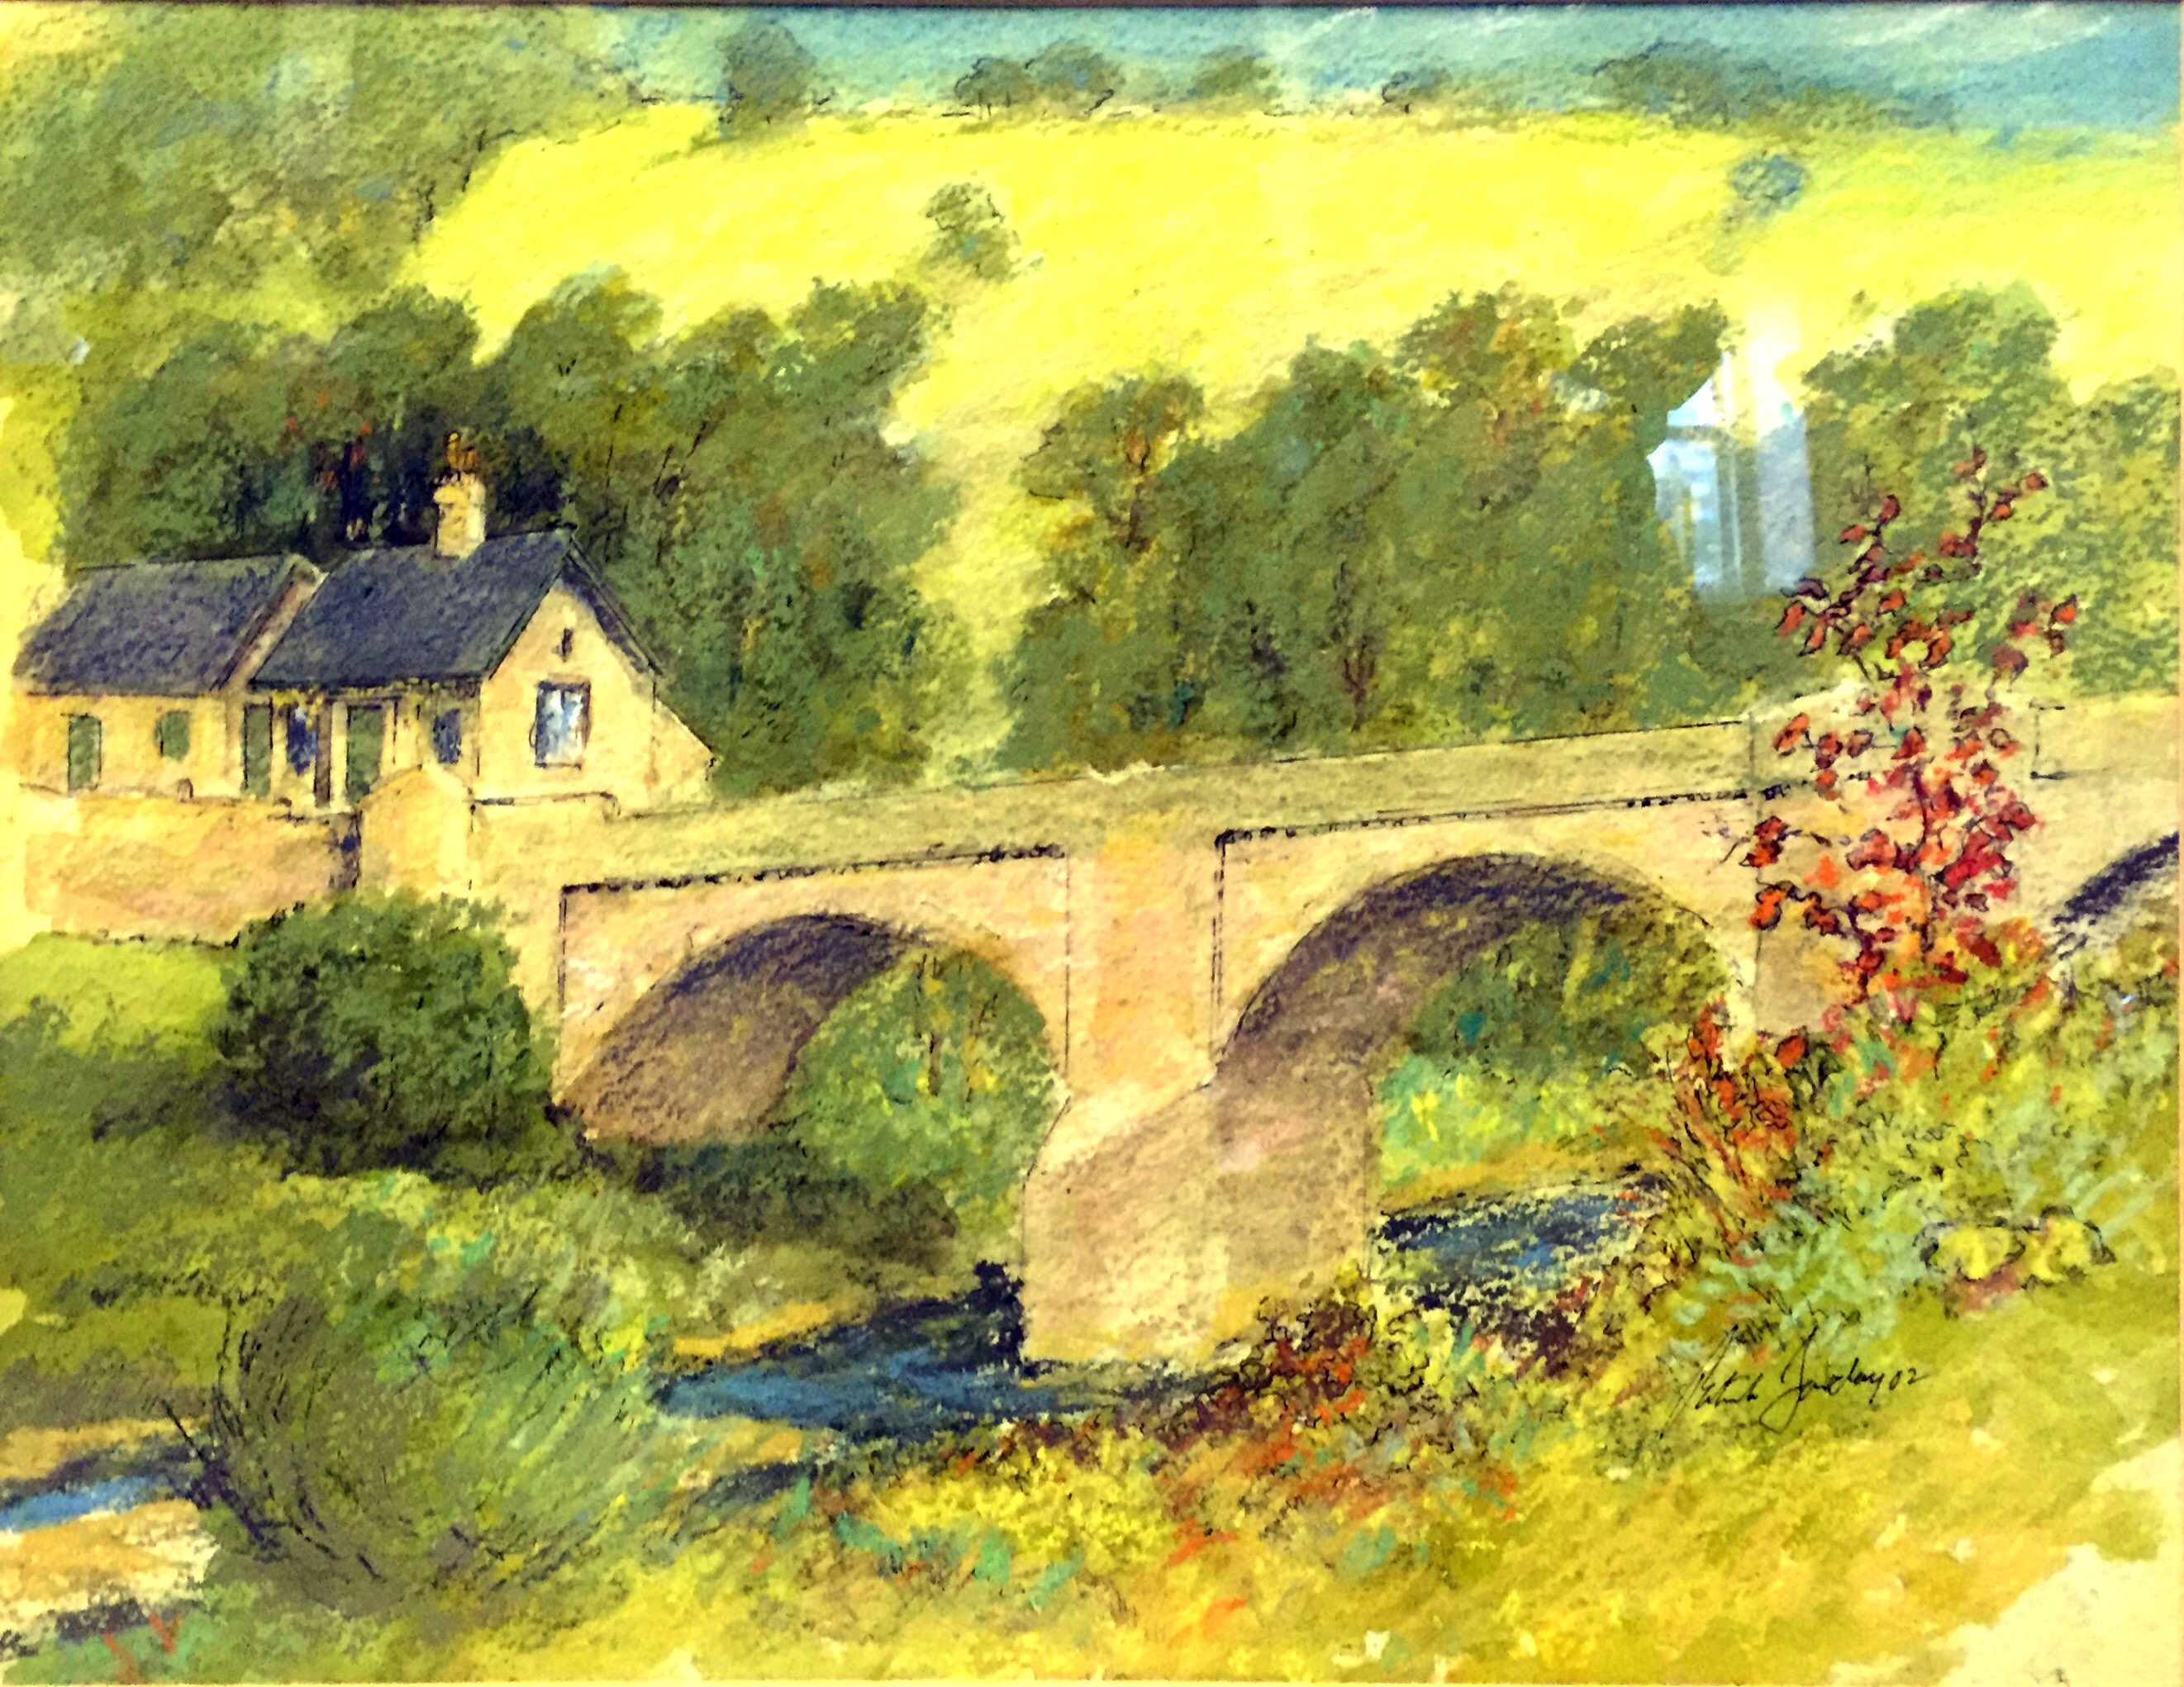 A watercolour by Patrick Barclay 2002 - Image 2 of 3